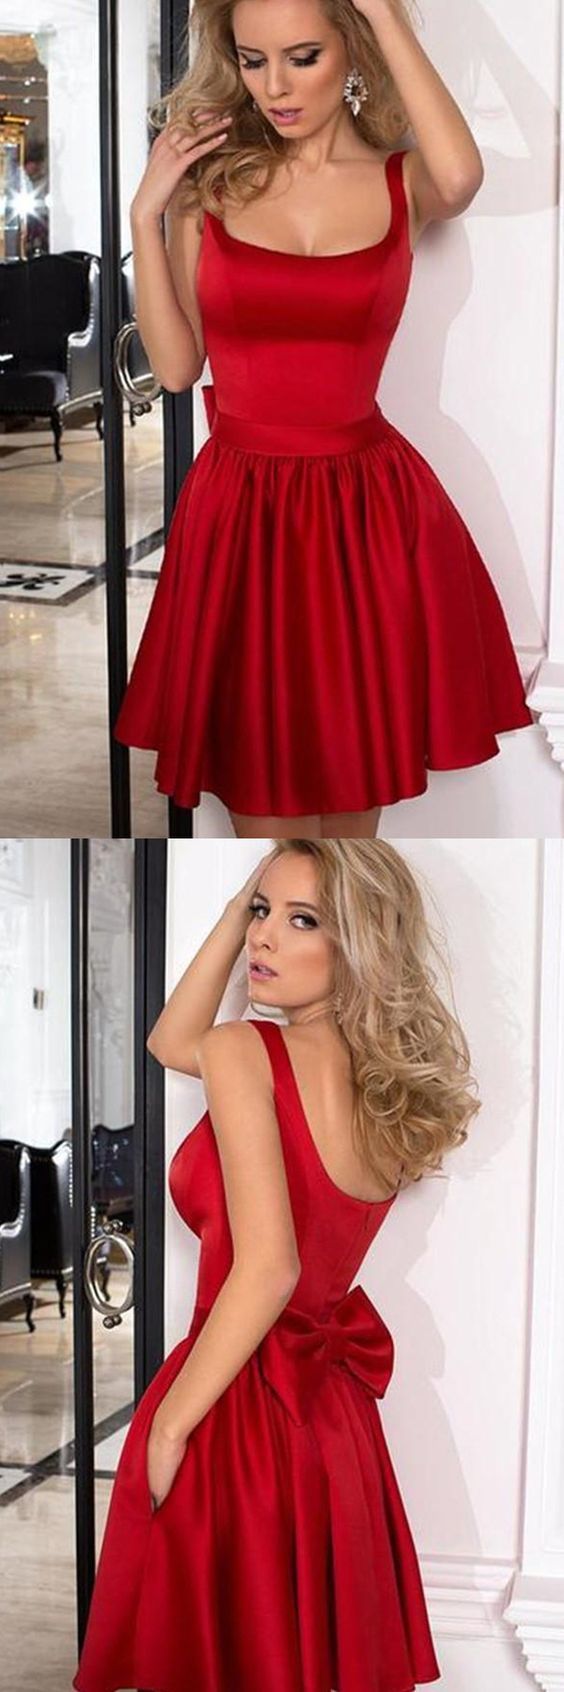 Fashion Straps Red Krista A Line Homecoming Dresses Cute CD241